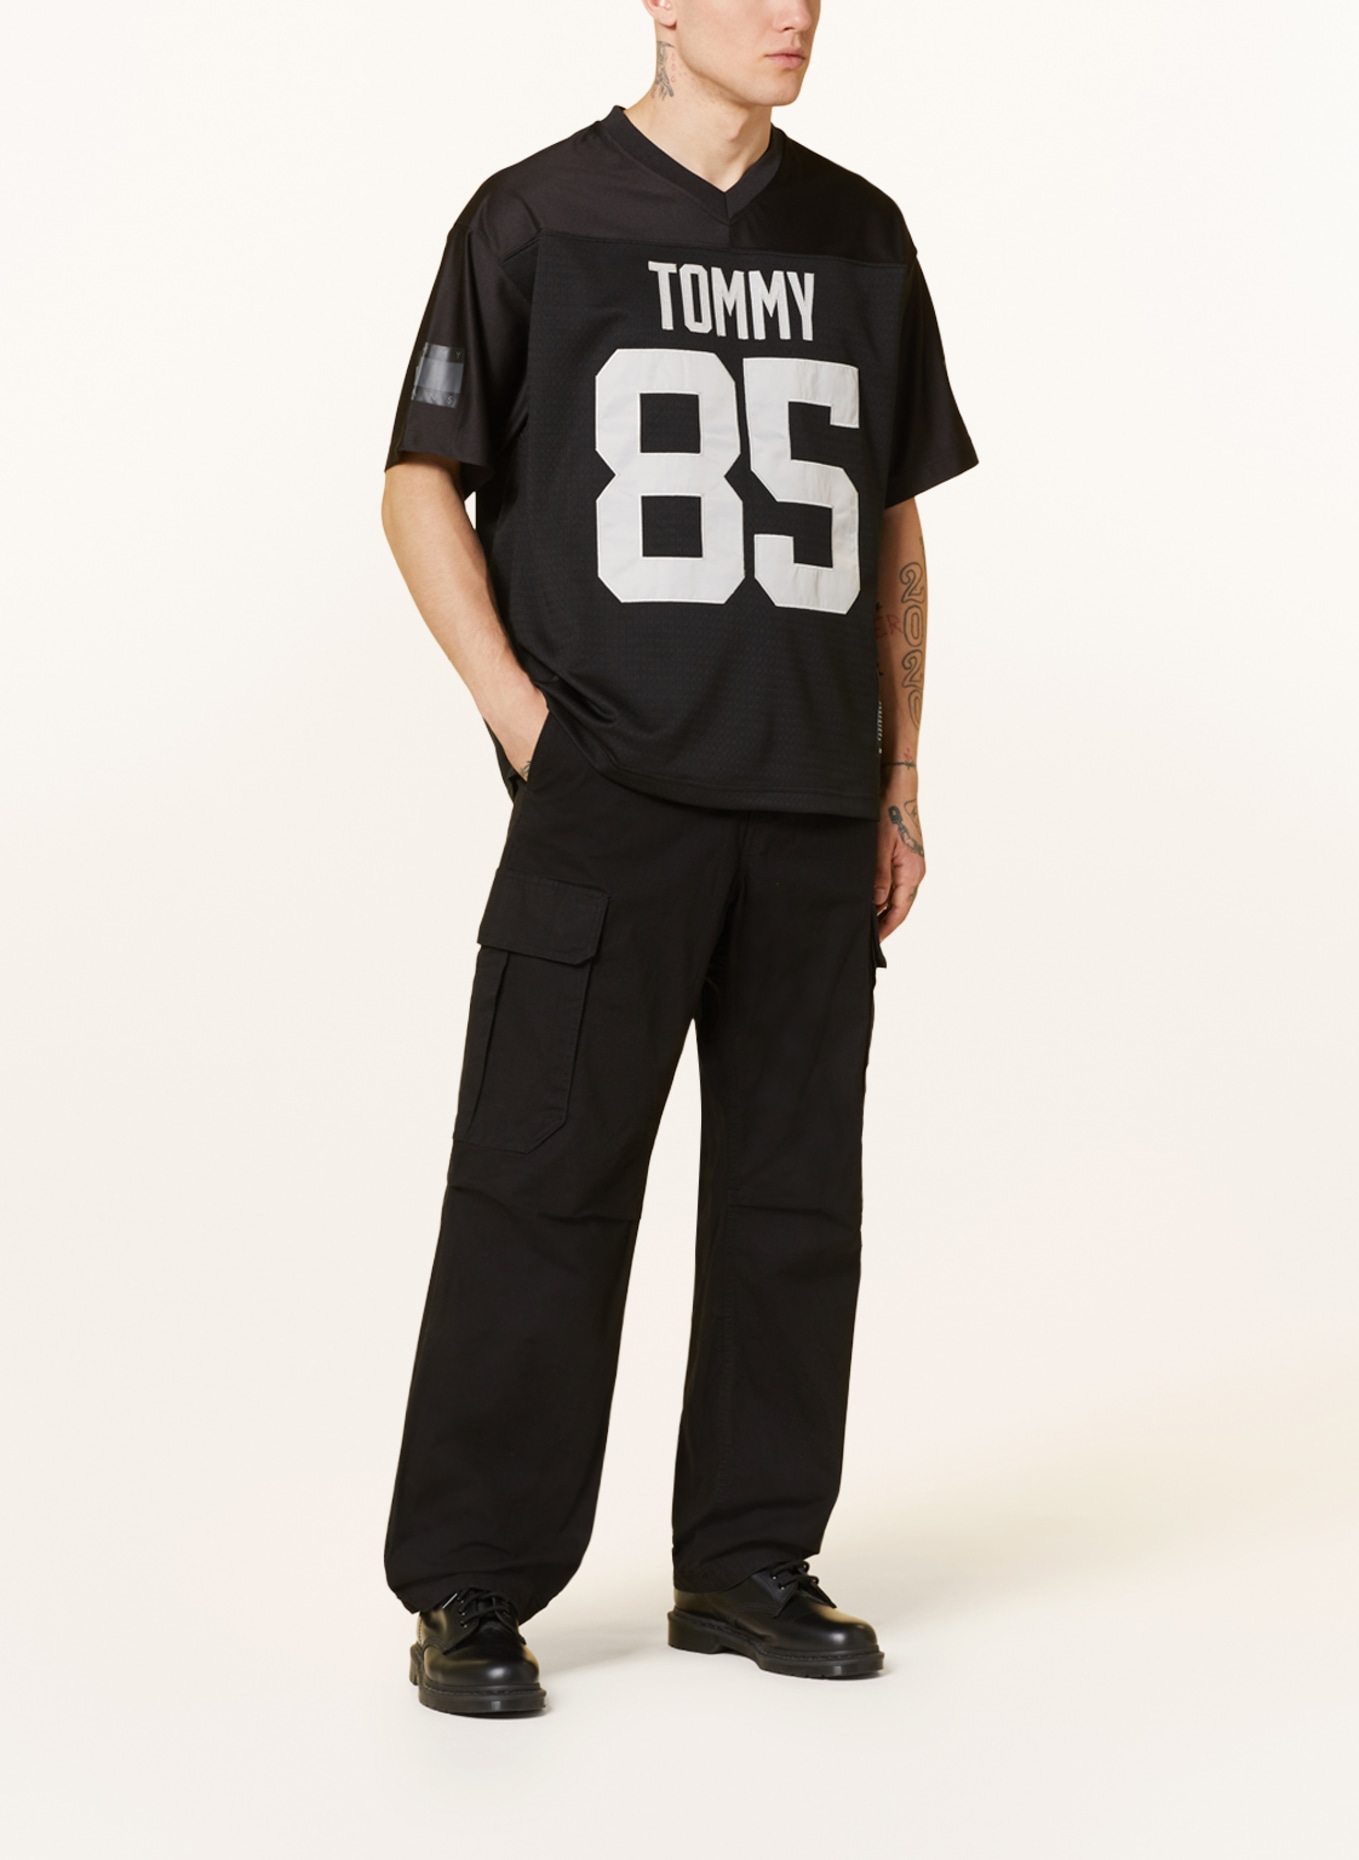 TOMMY JEANS gray T-shirt in black/ mesh of made